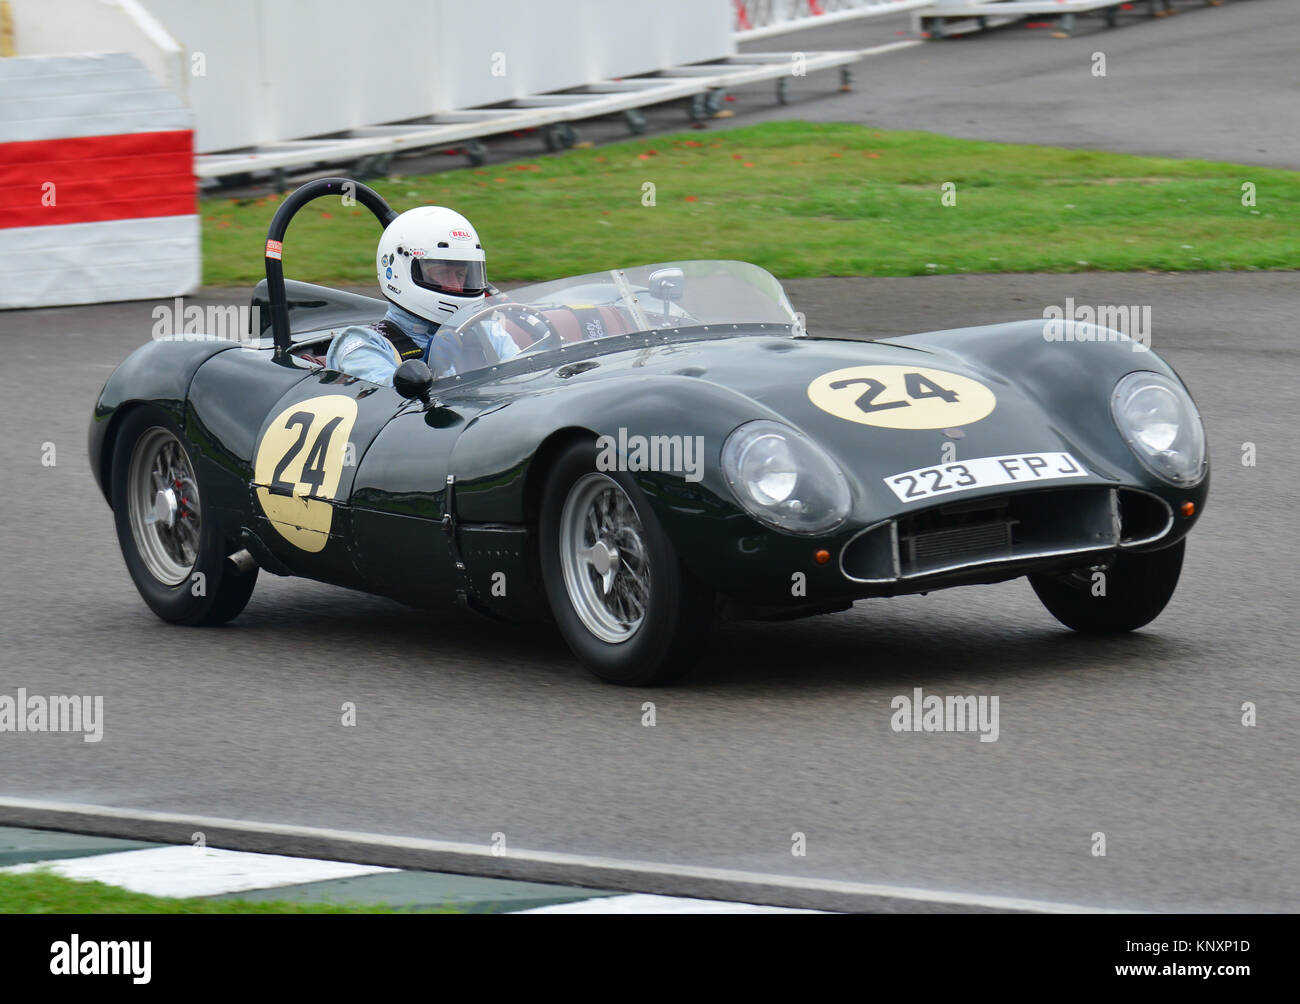 223 FPJ, Howard Maguire, Playford-MG, Goodwood Revival 2013, madgwick Schale Stockfoto